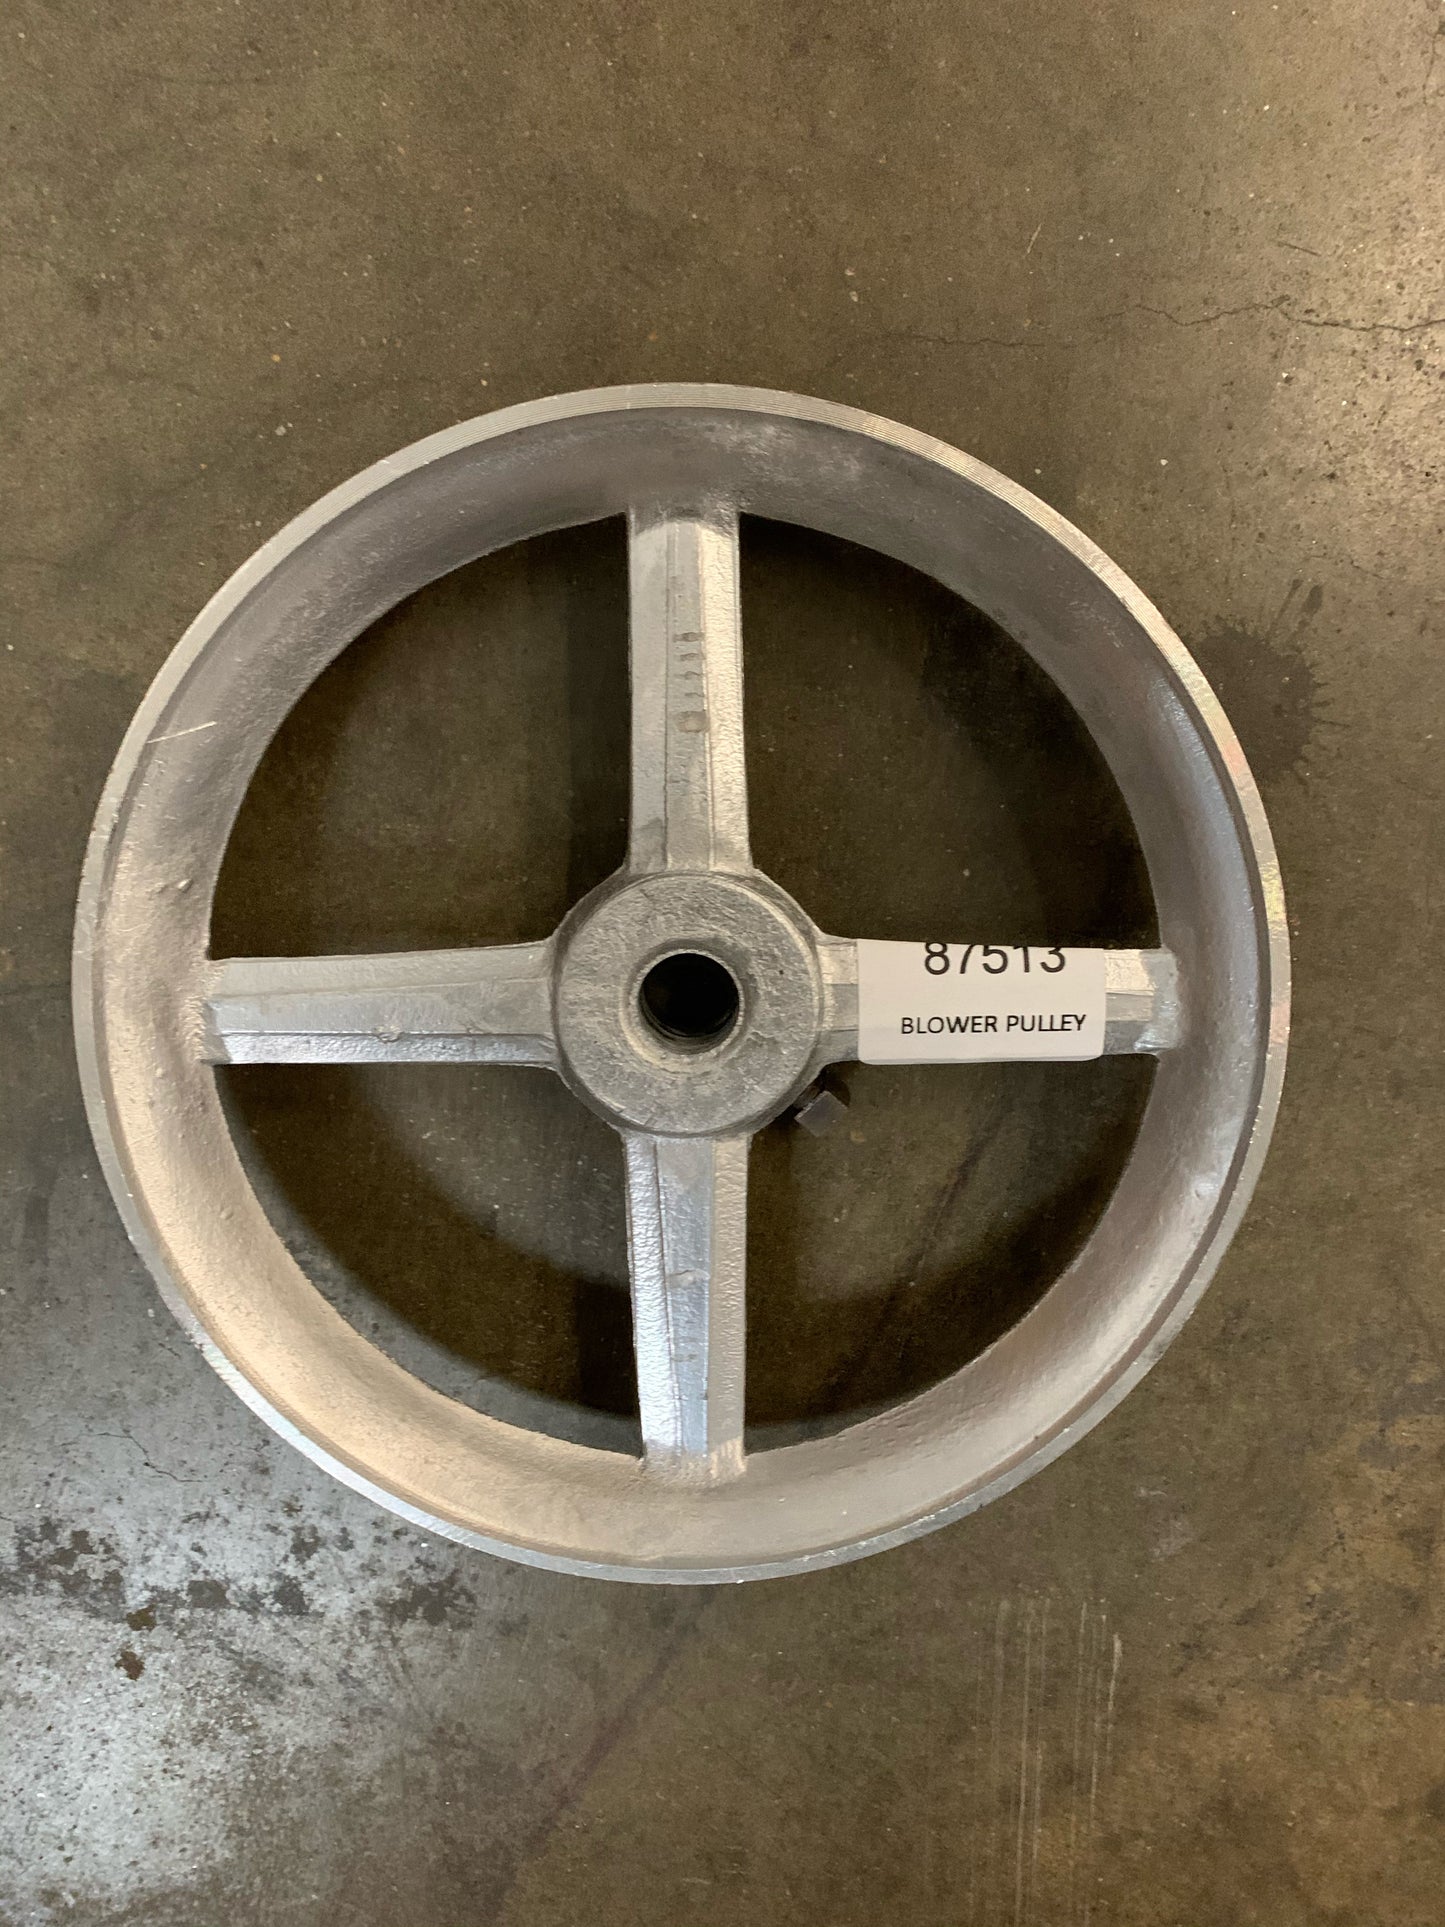 Blower Pulley, W38/A38D/A38S PN: 87513